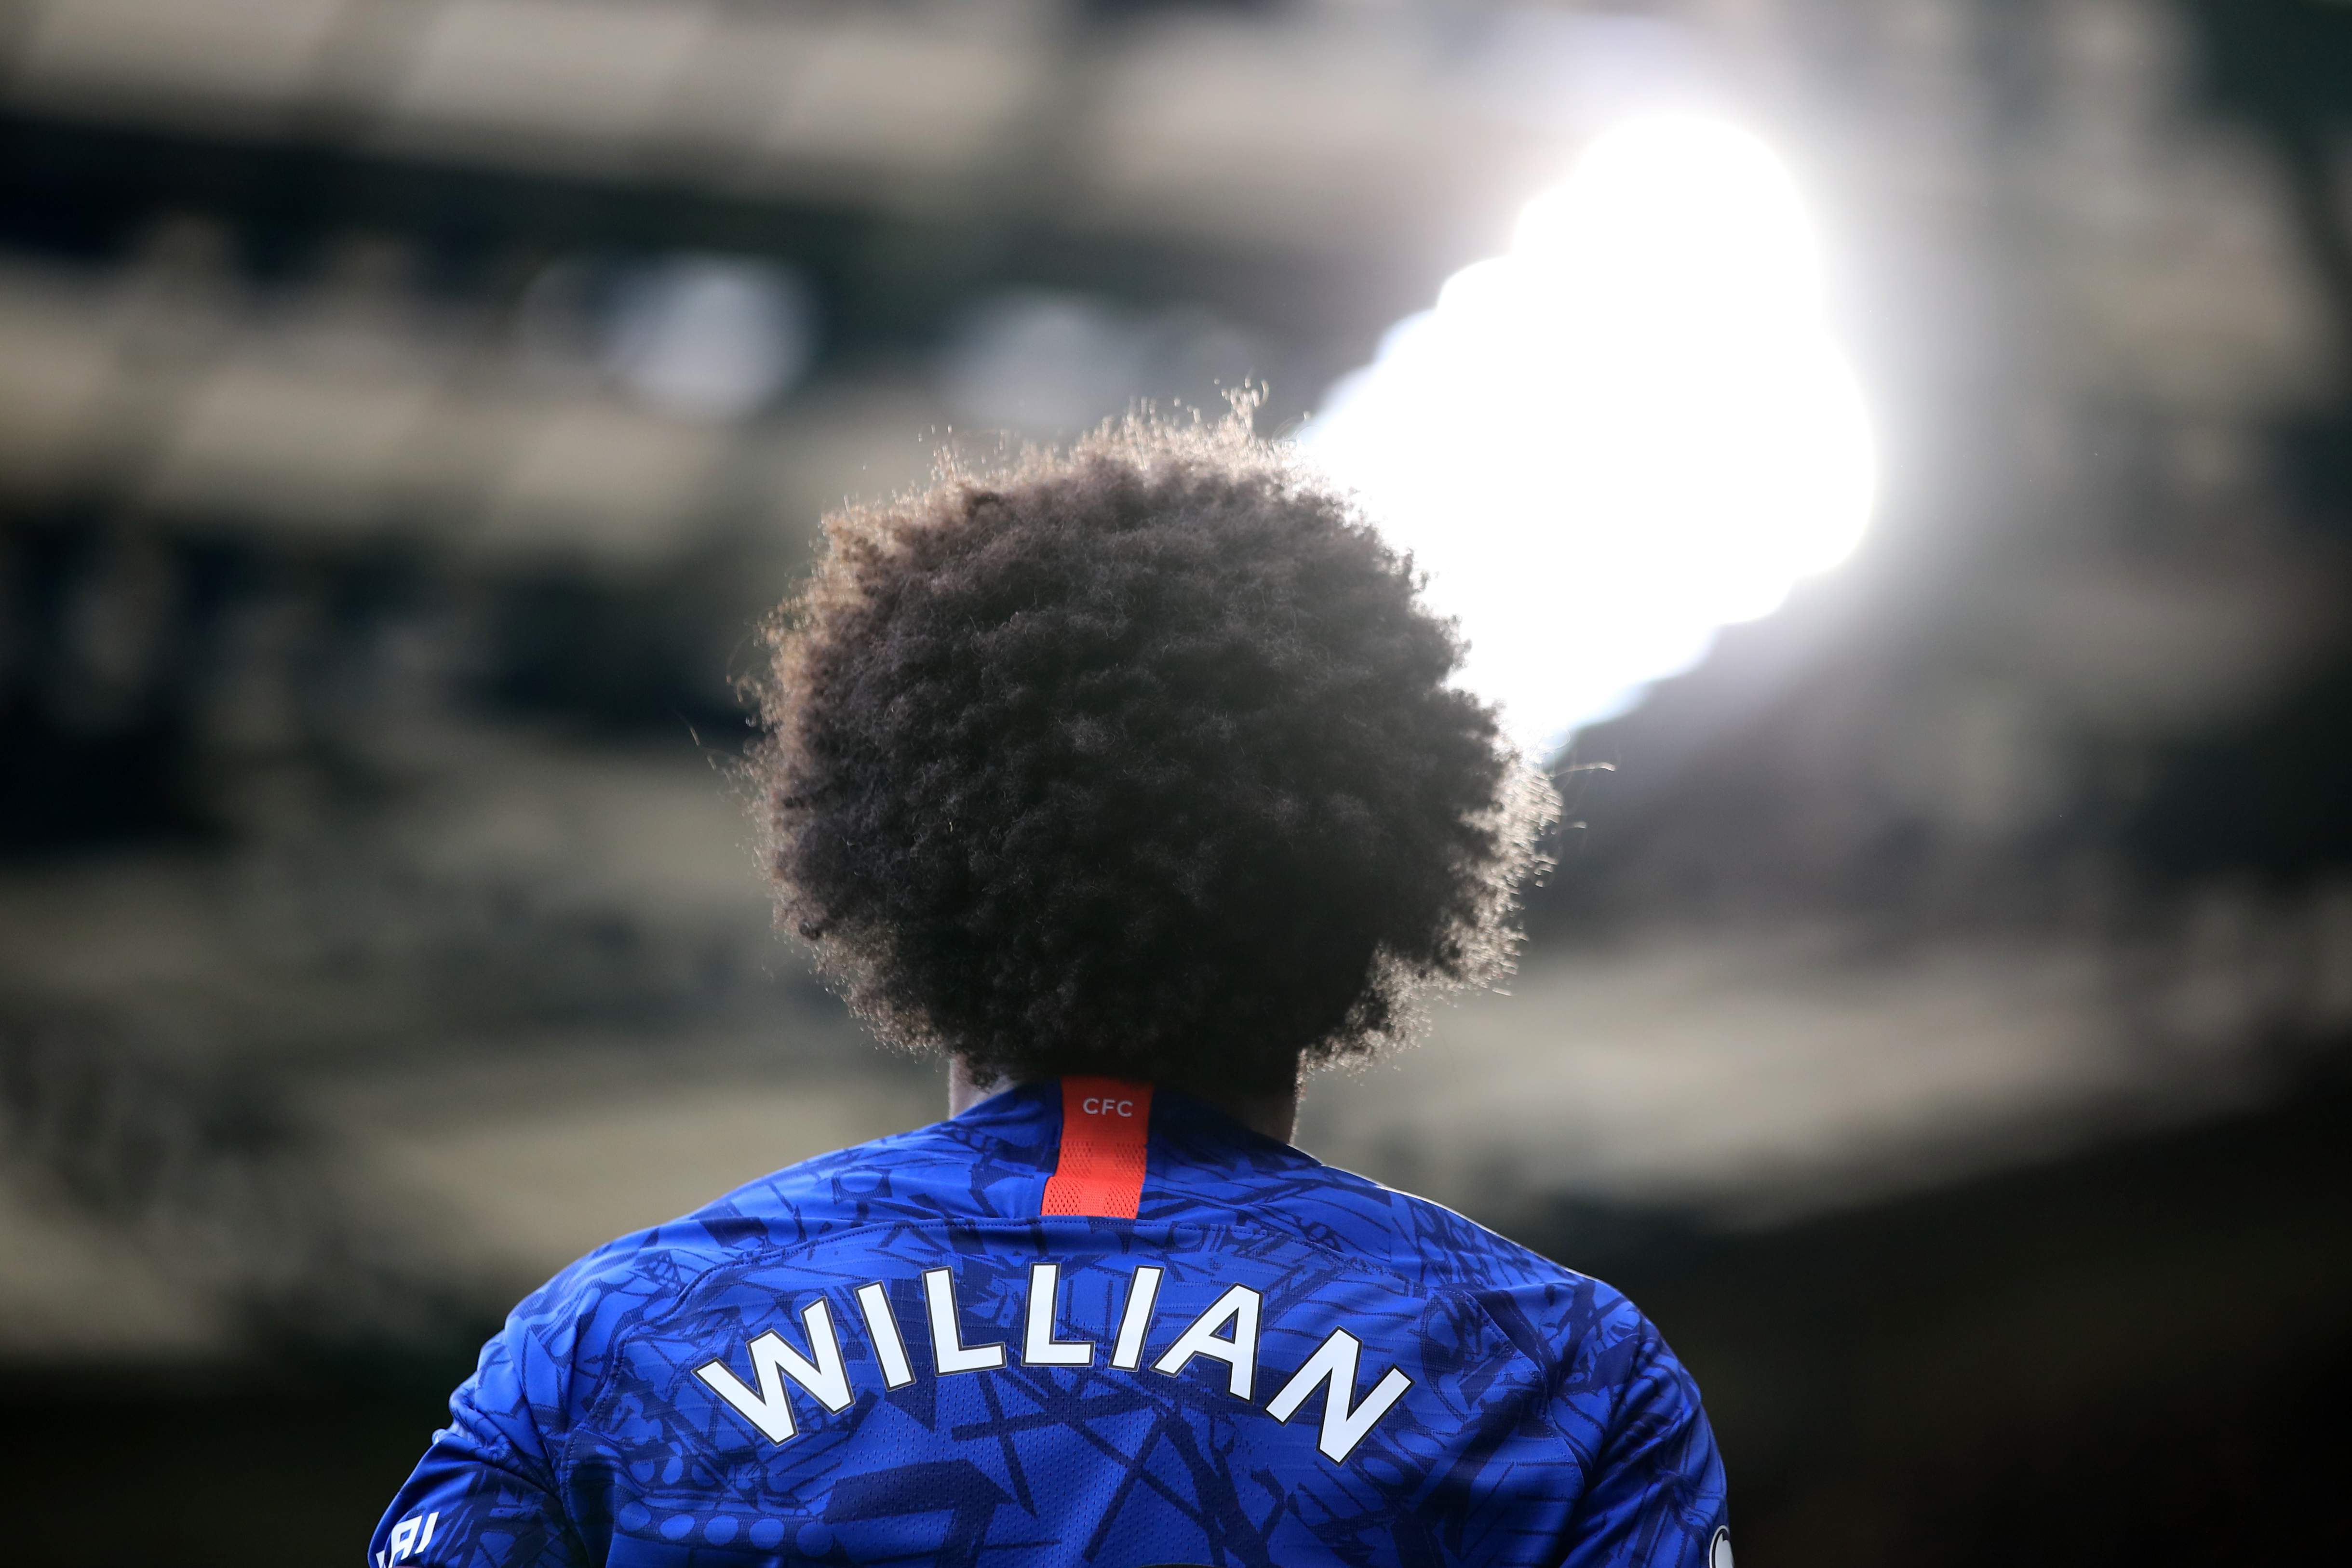 Chelsea and Manchester United were monitoring Willian